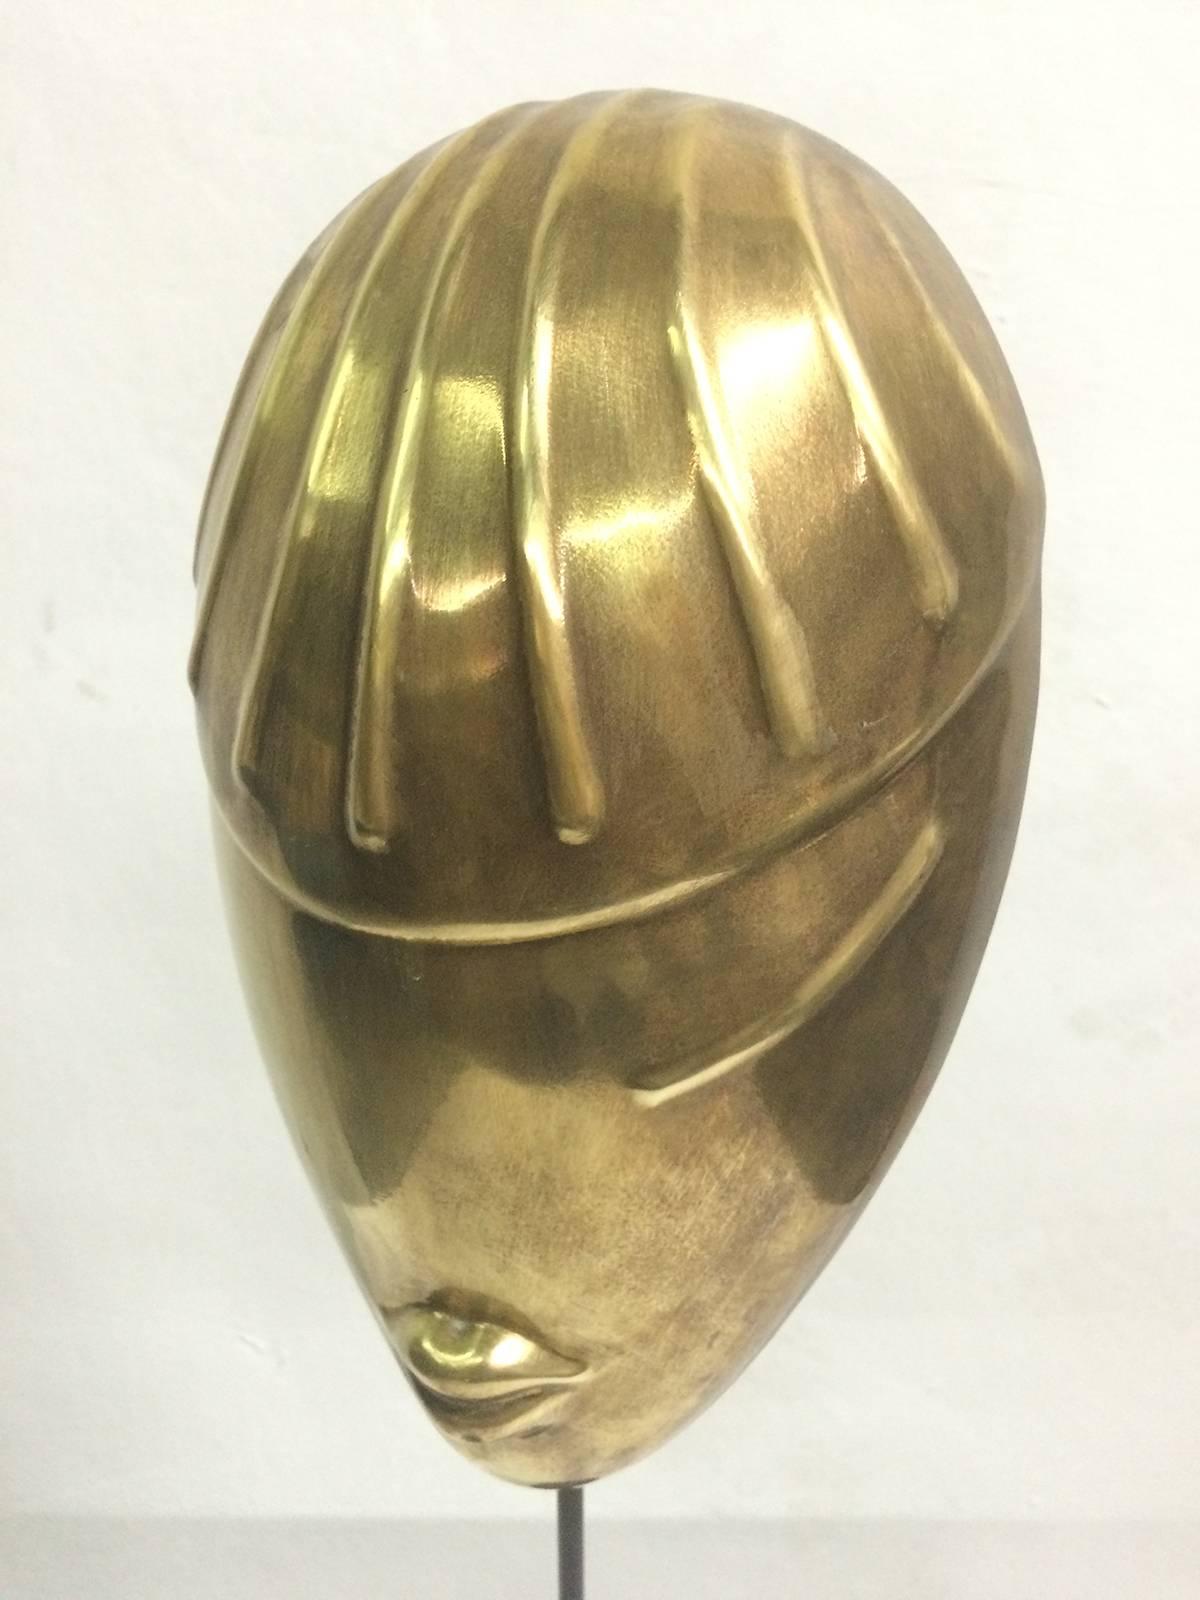 This sculpture is a stylized representation of a female face in brass. The oval face is finished with lines representing hair or a hat, one eye and lips. The piece is mounted on a piece of rod and a heavy steel base finished in black. Dimensions of